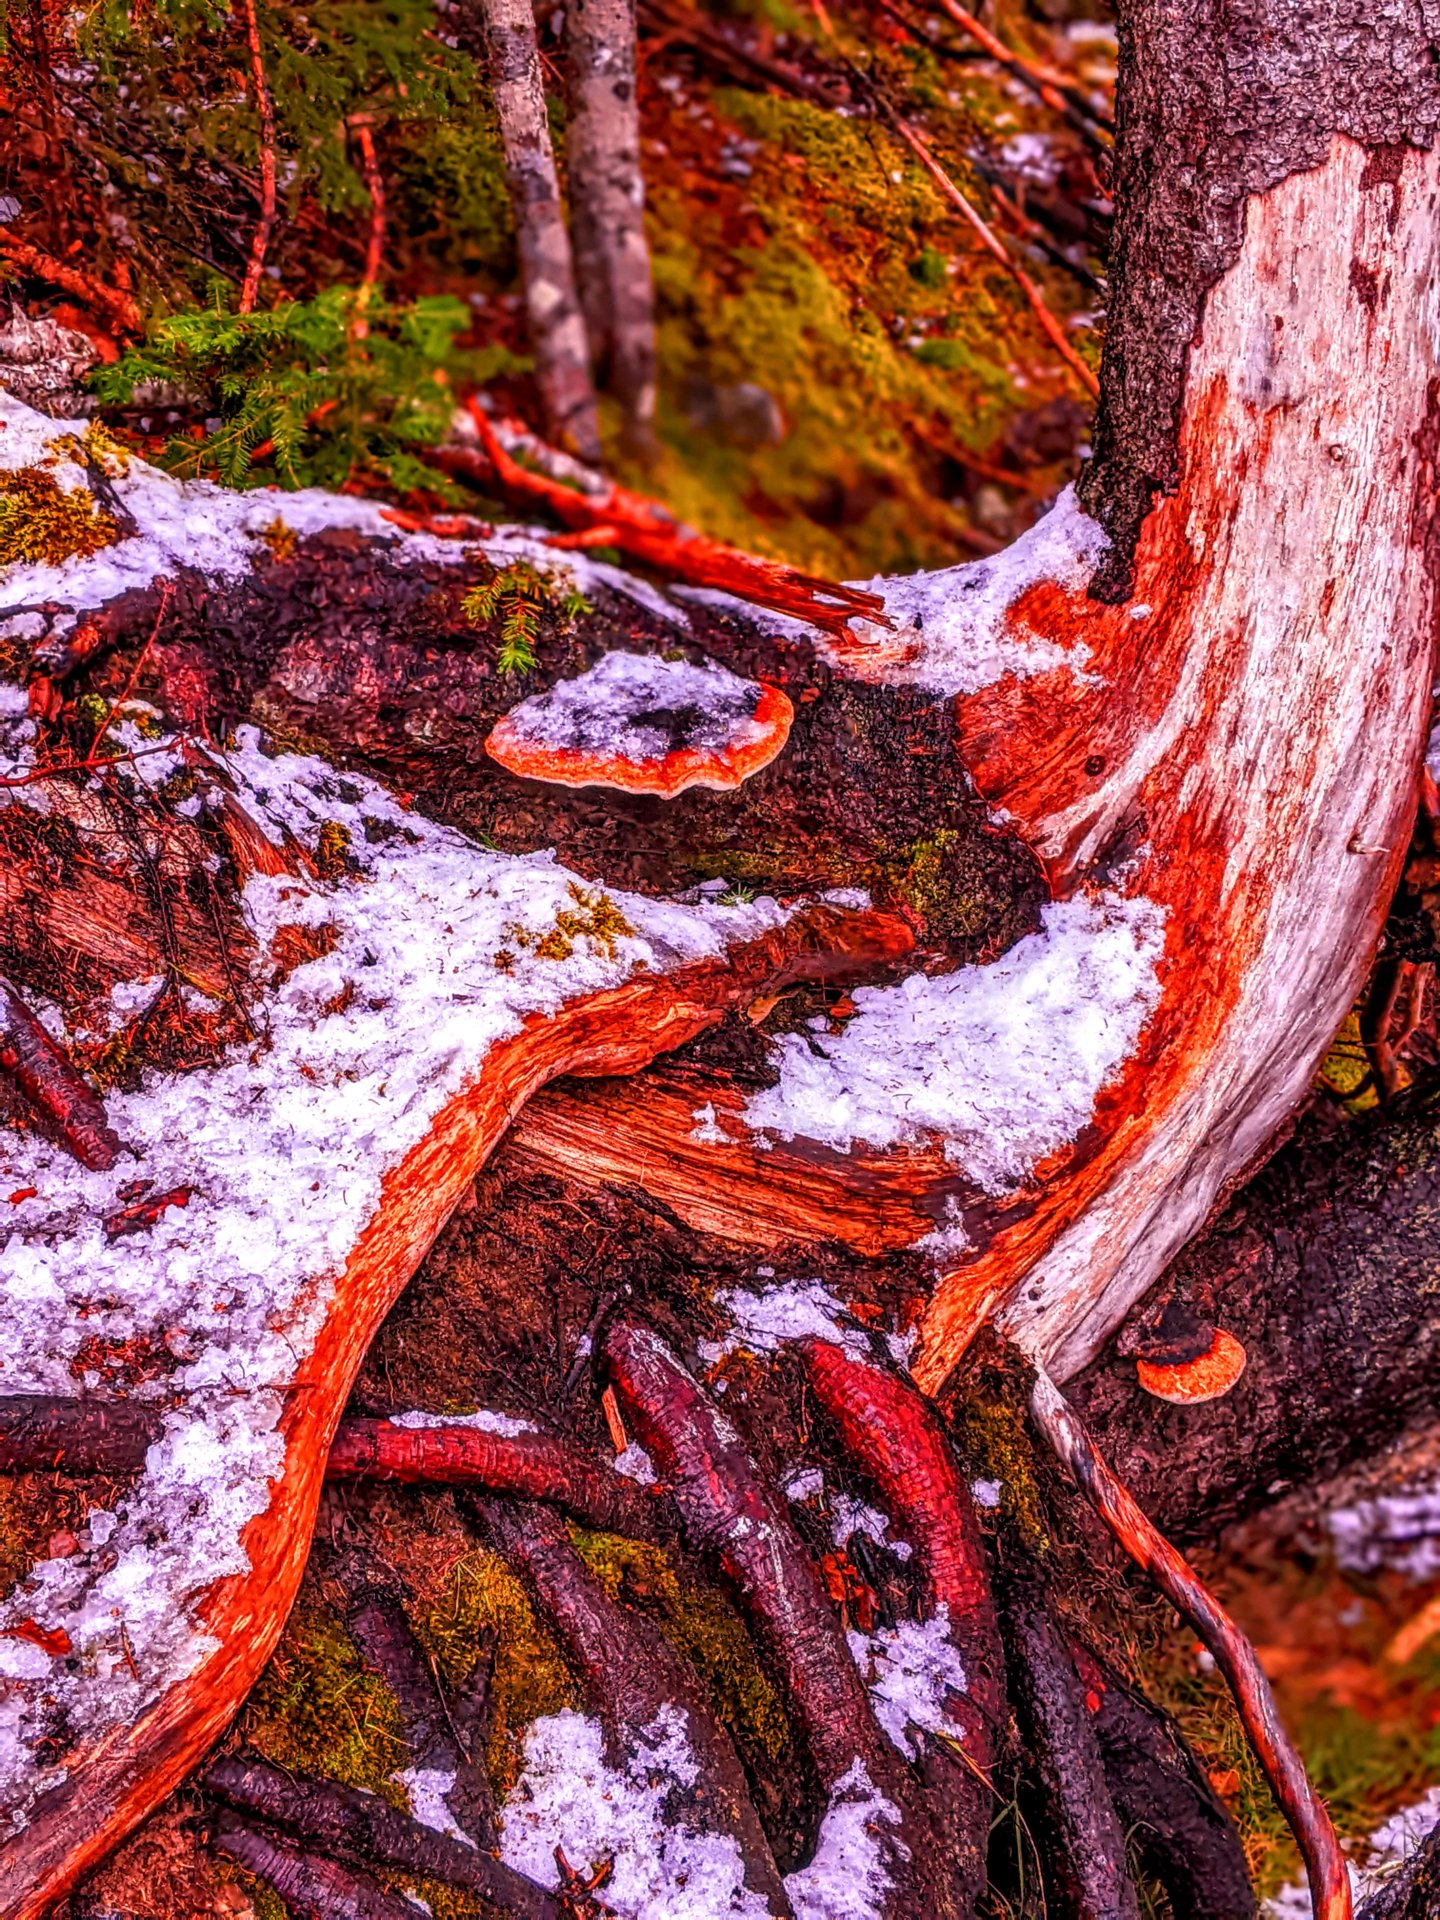 Dec, 02, 2022, snow on tree roots on the ocean bay in Lewis Cove, Perry, Maine.